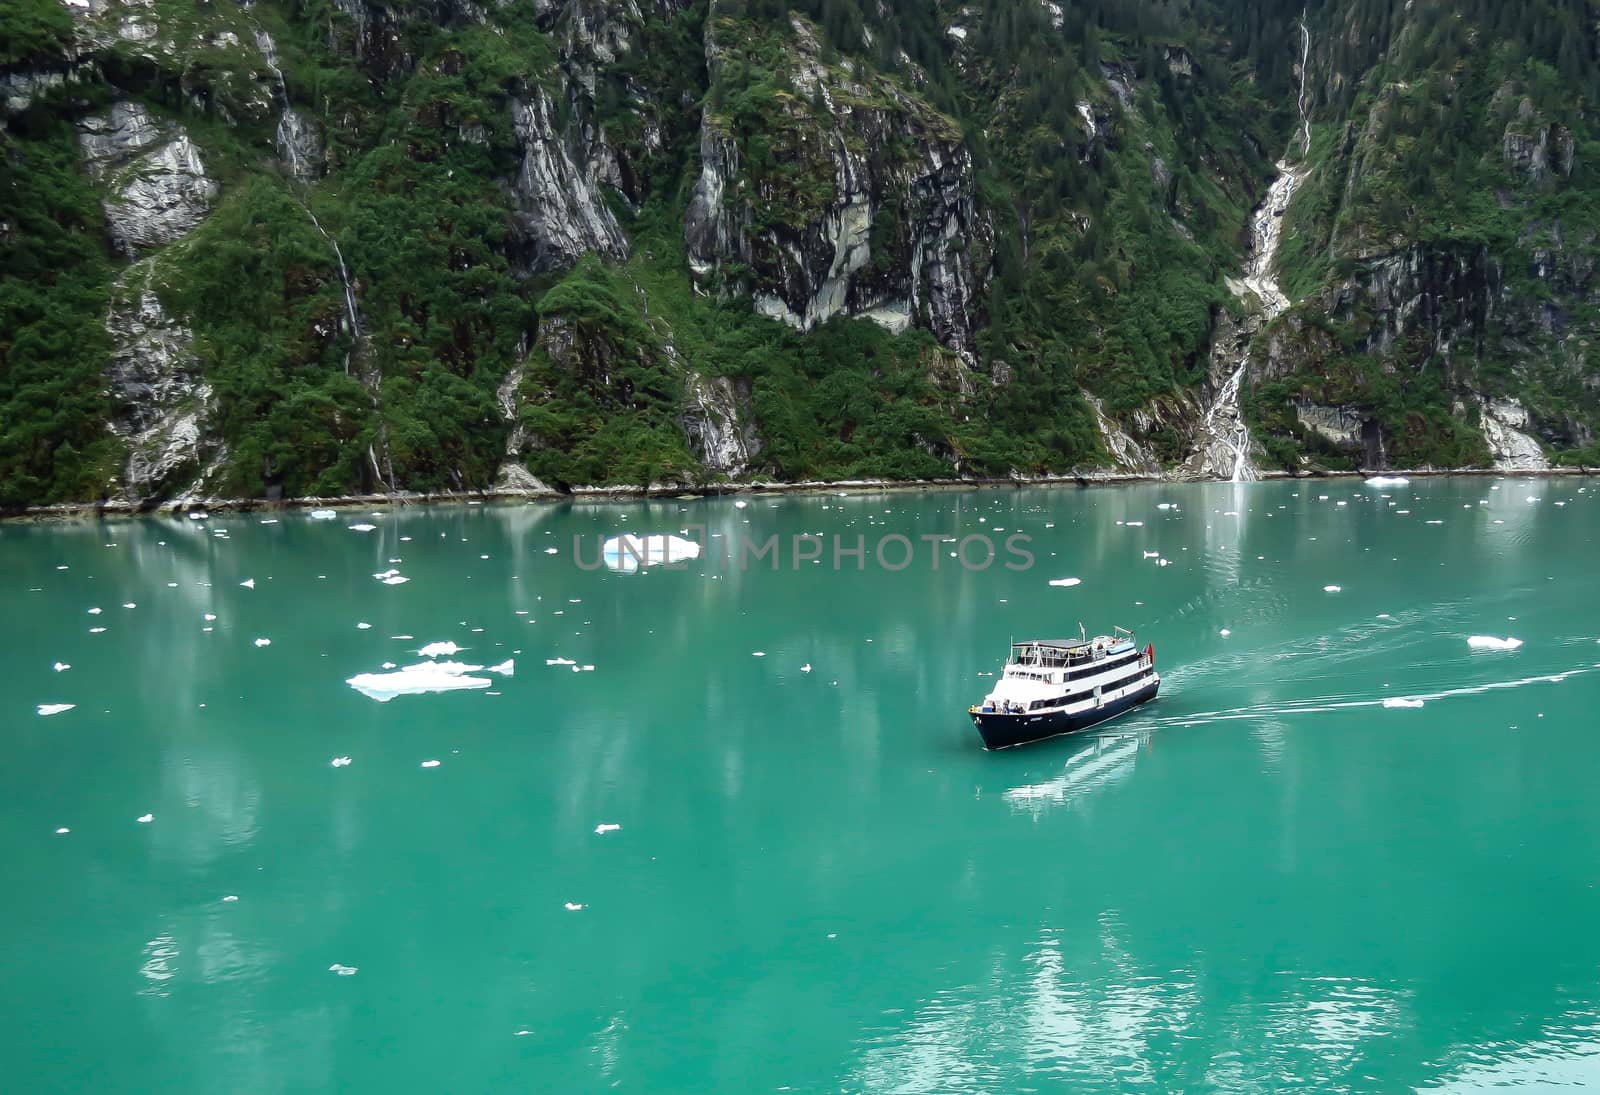 Tracy Arm, Alaska, USA- June 19, 2012: A small cruise ship with passengers on the deck admire the scenery in this lovely area of Tracy Arm in Alaska,